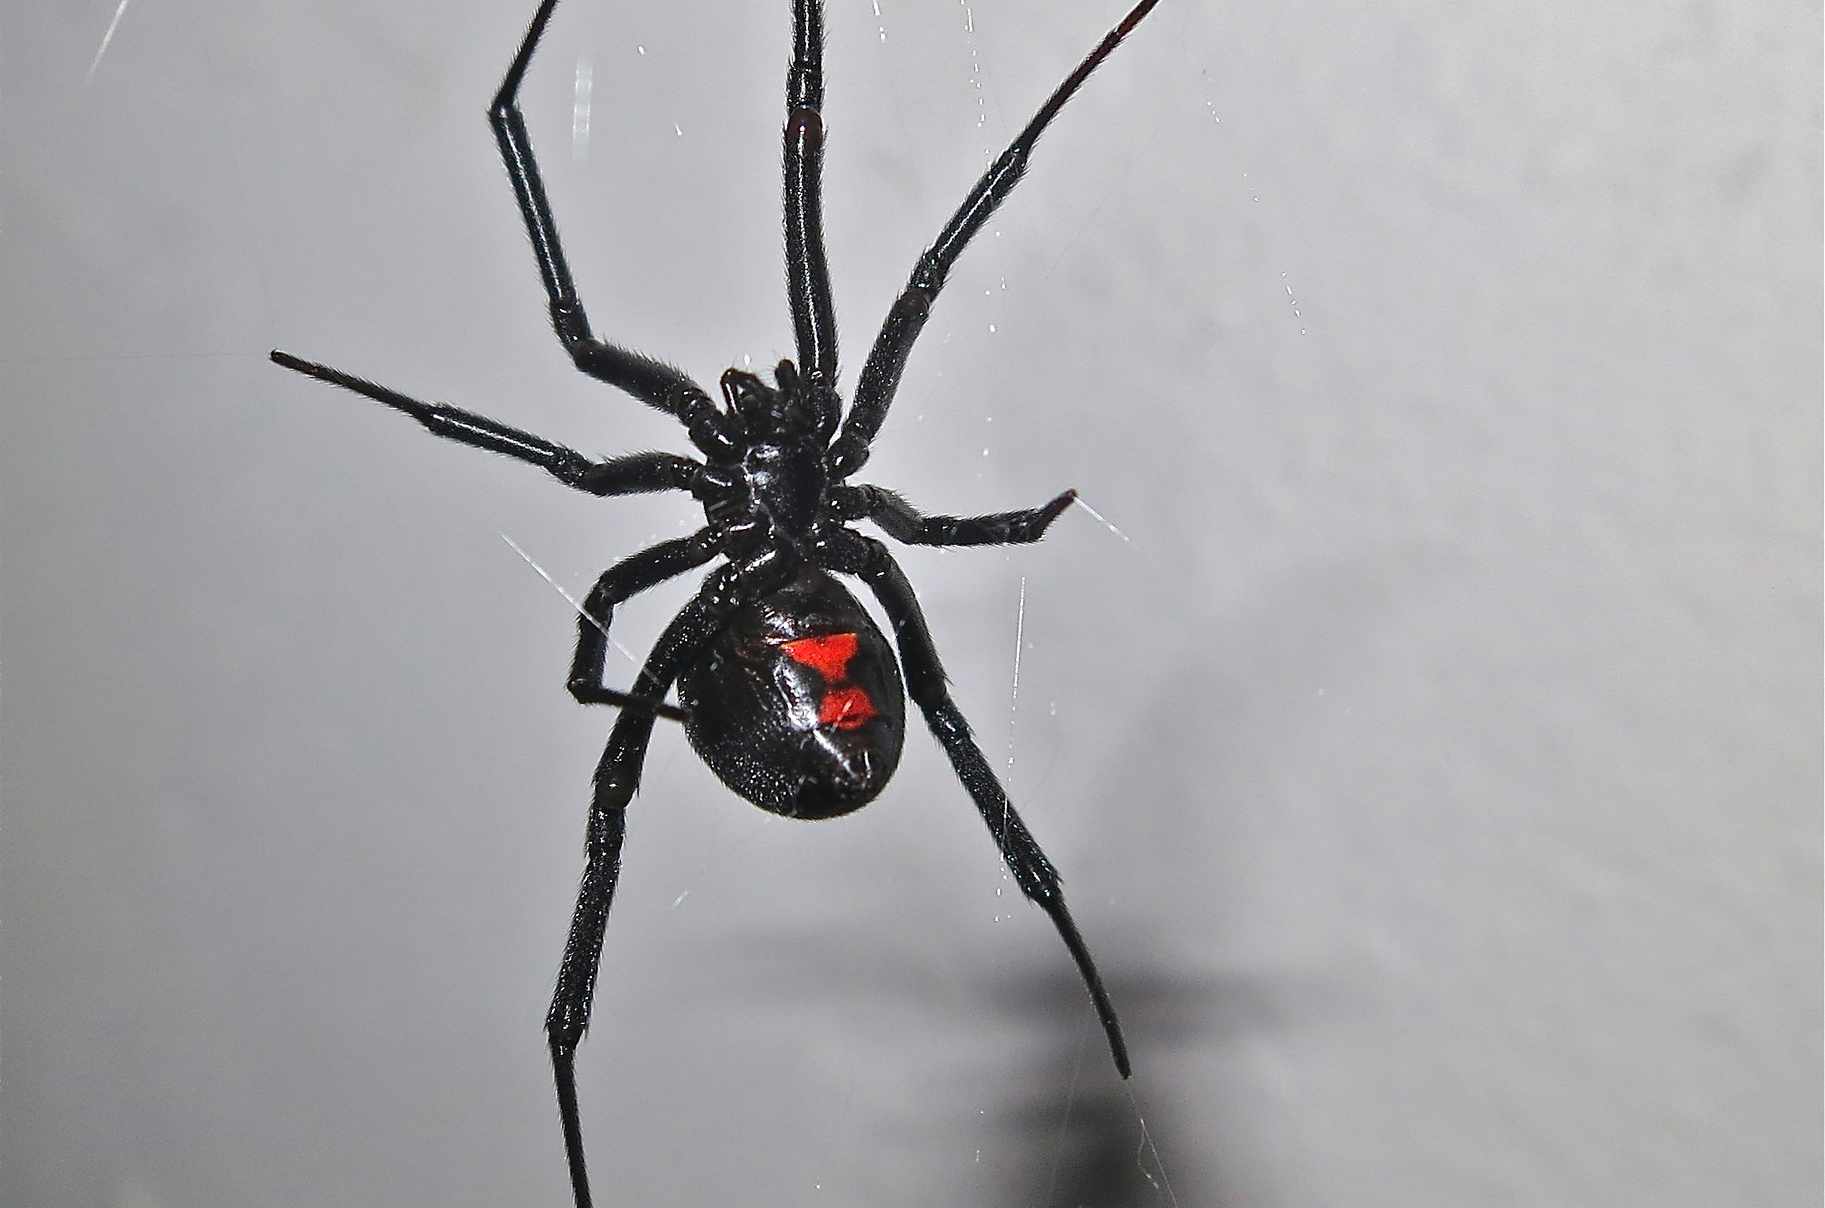 Are there any poisonous spiders you should not eat?